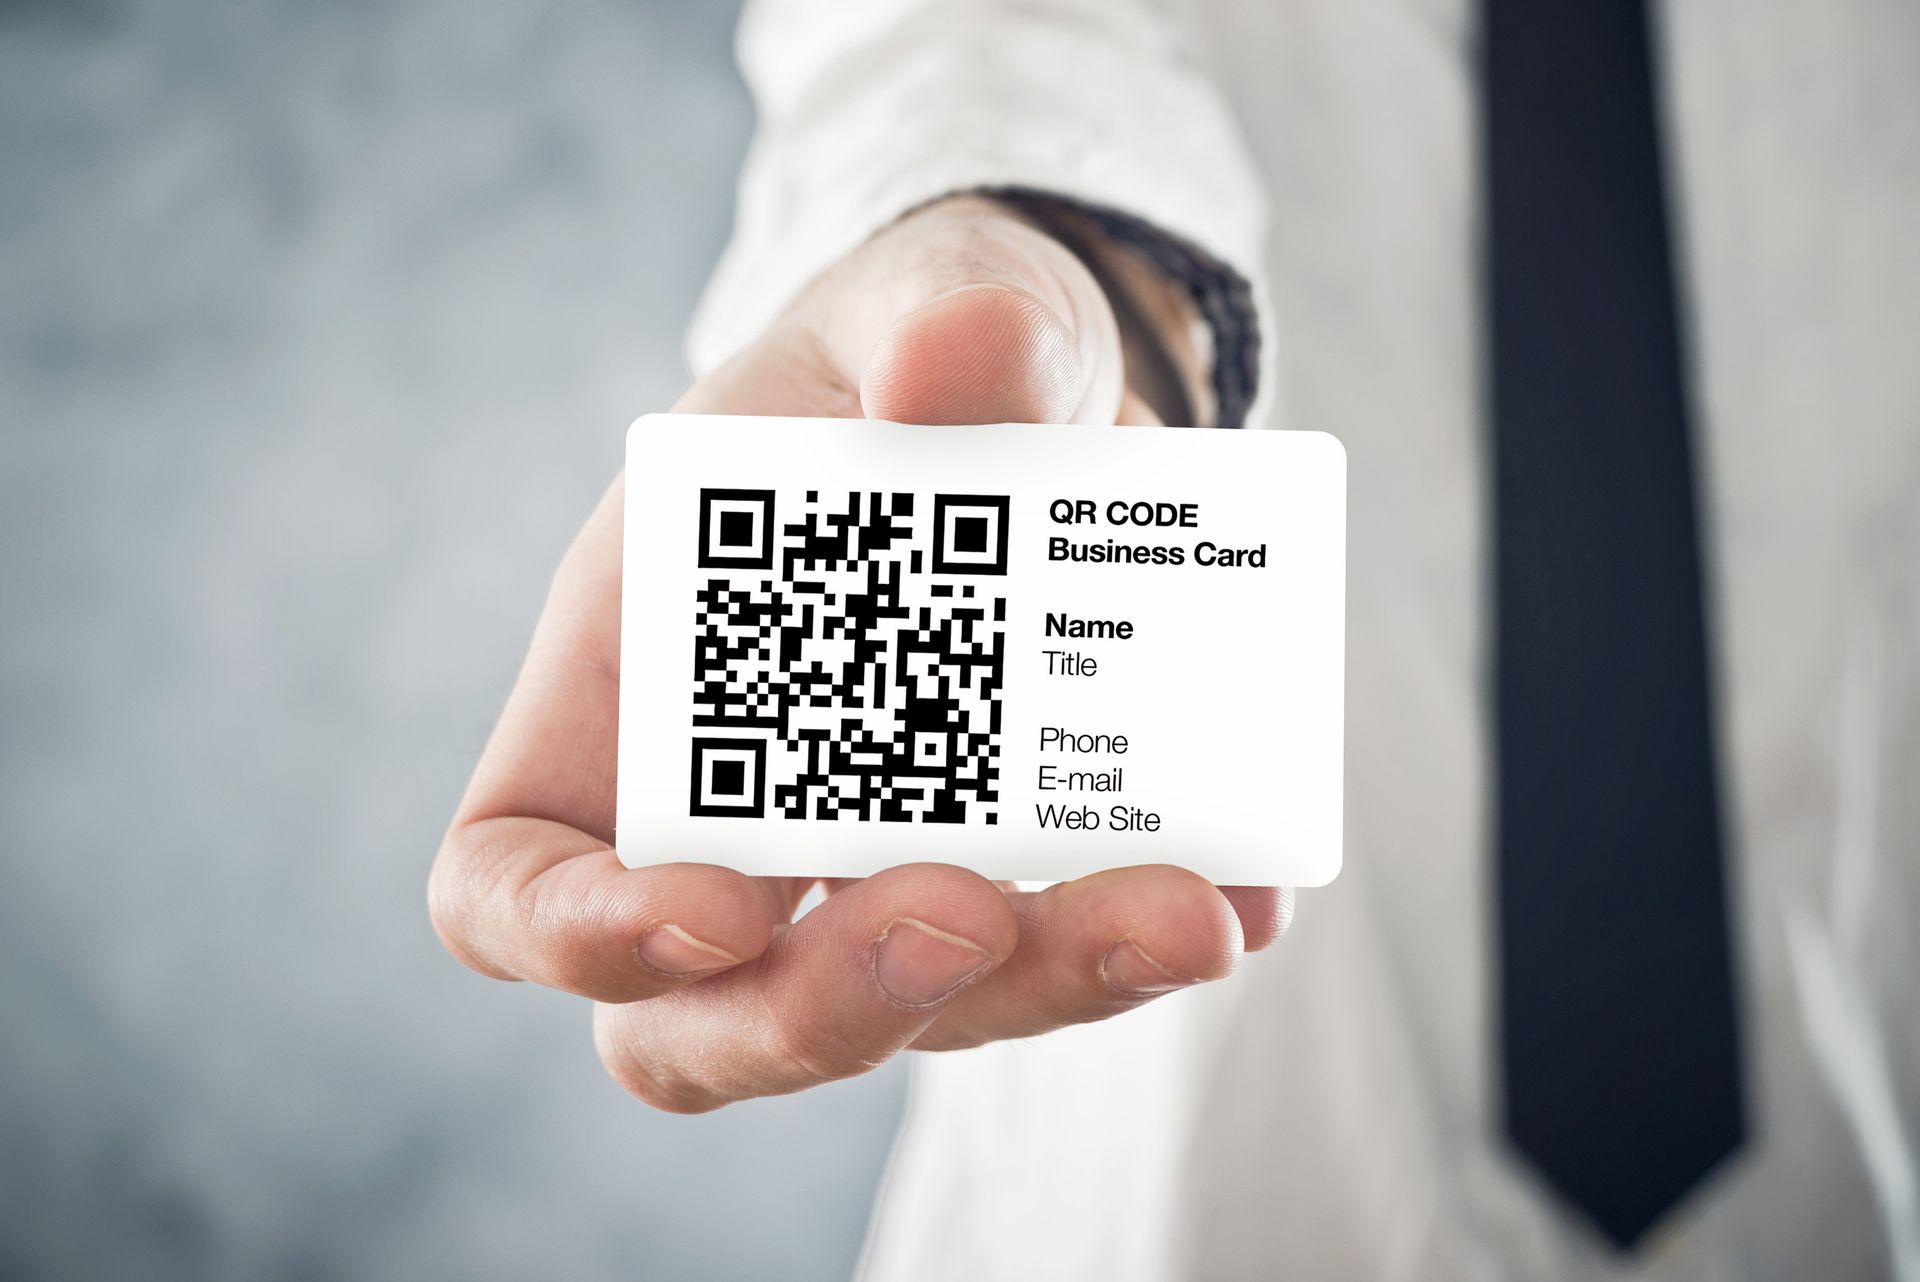 what QR code business card size fits you best